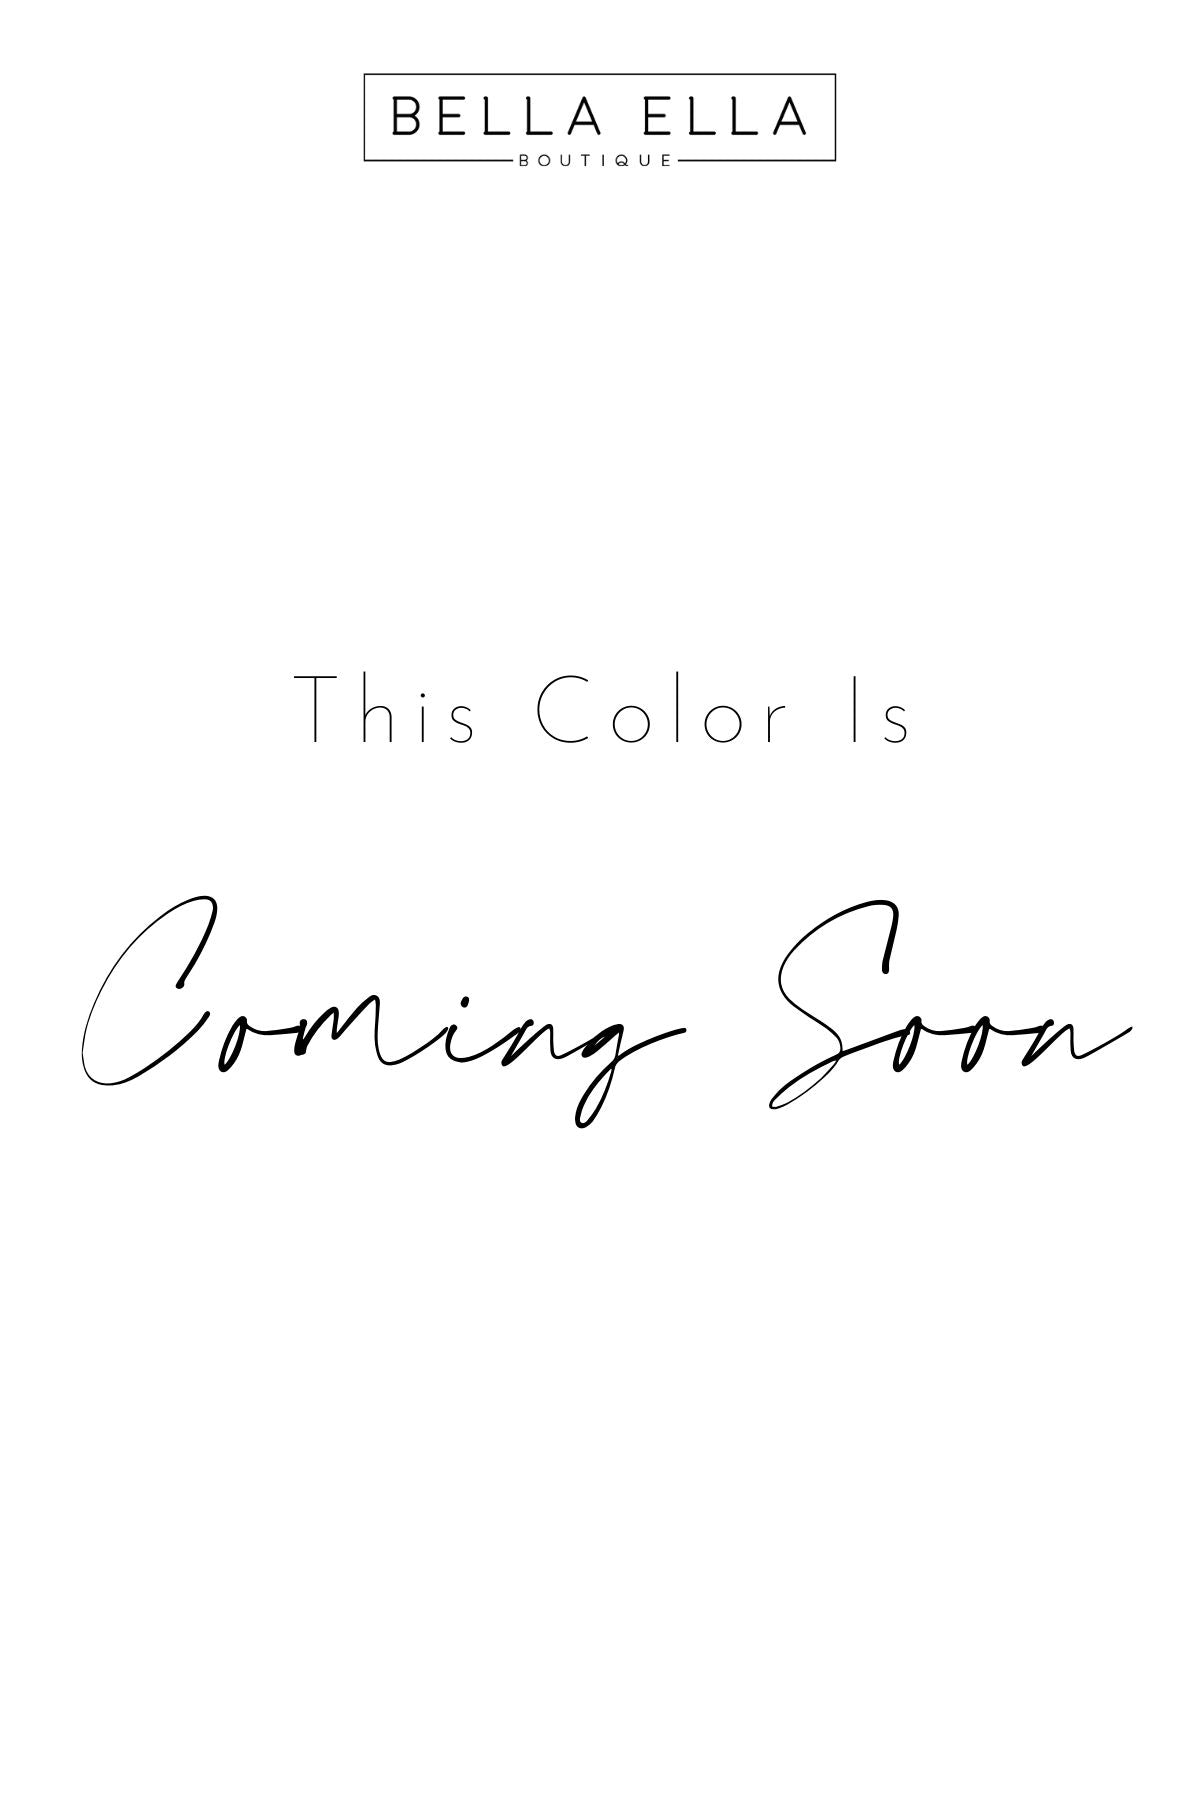 This Color Is Coming Soon!